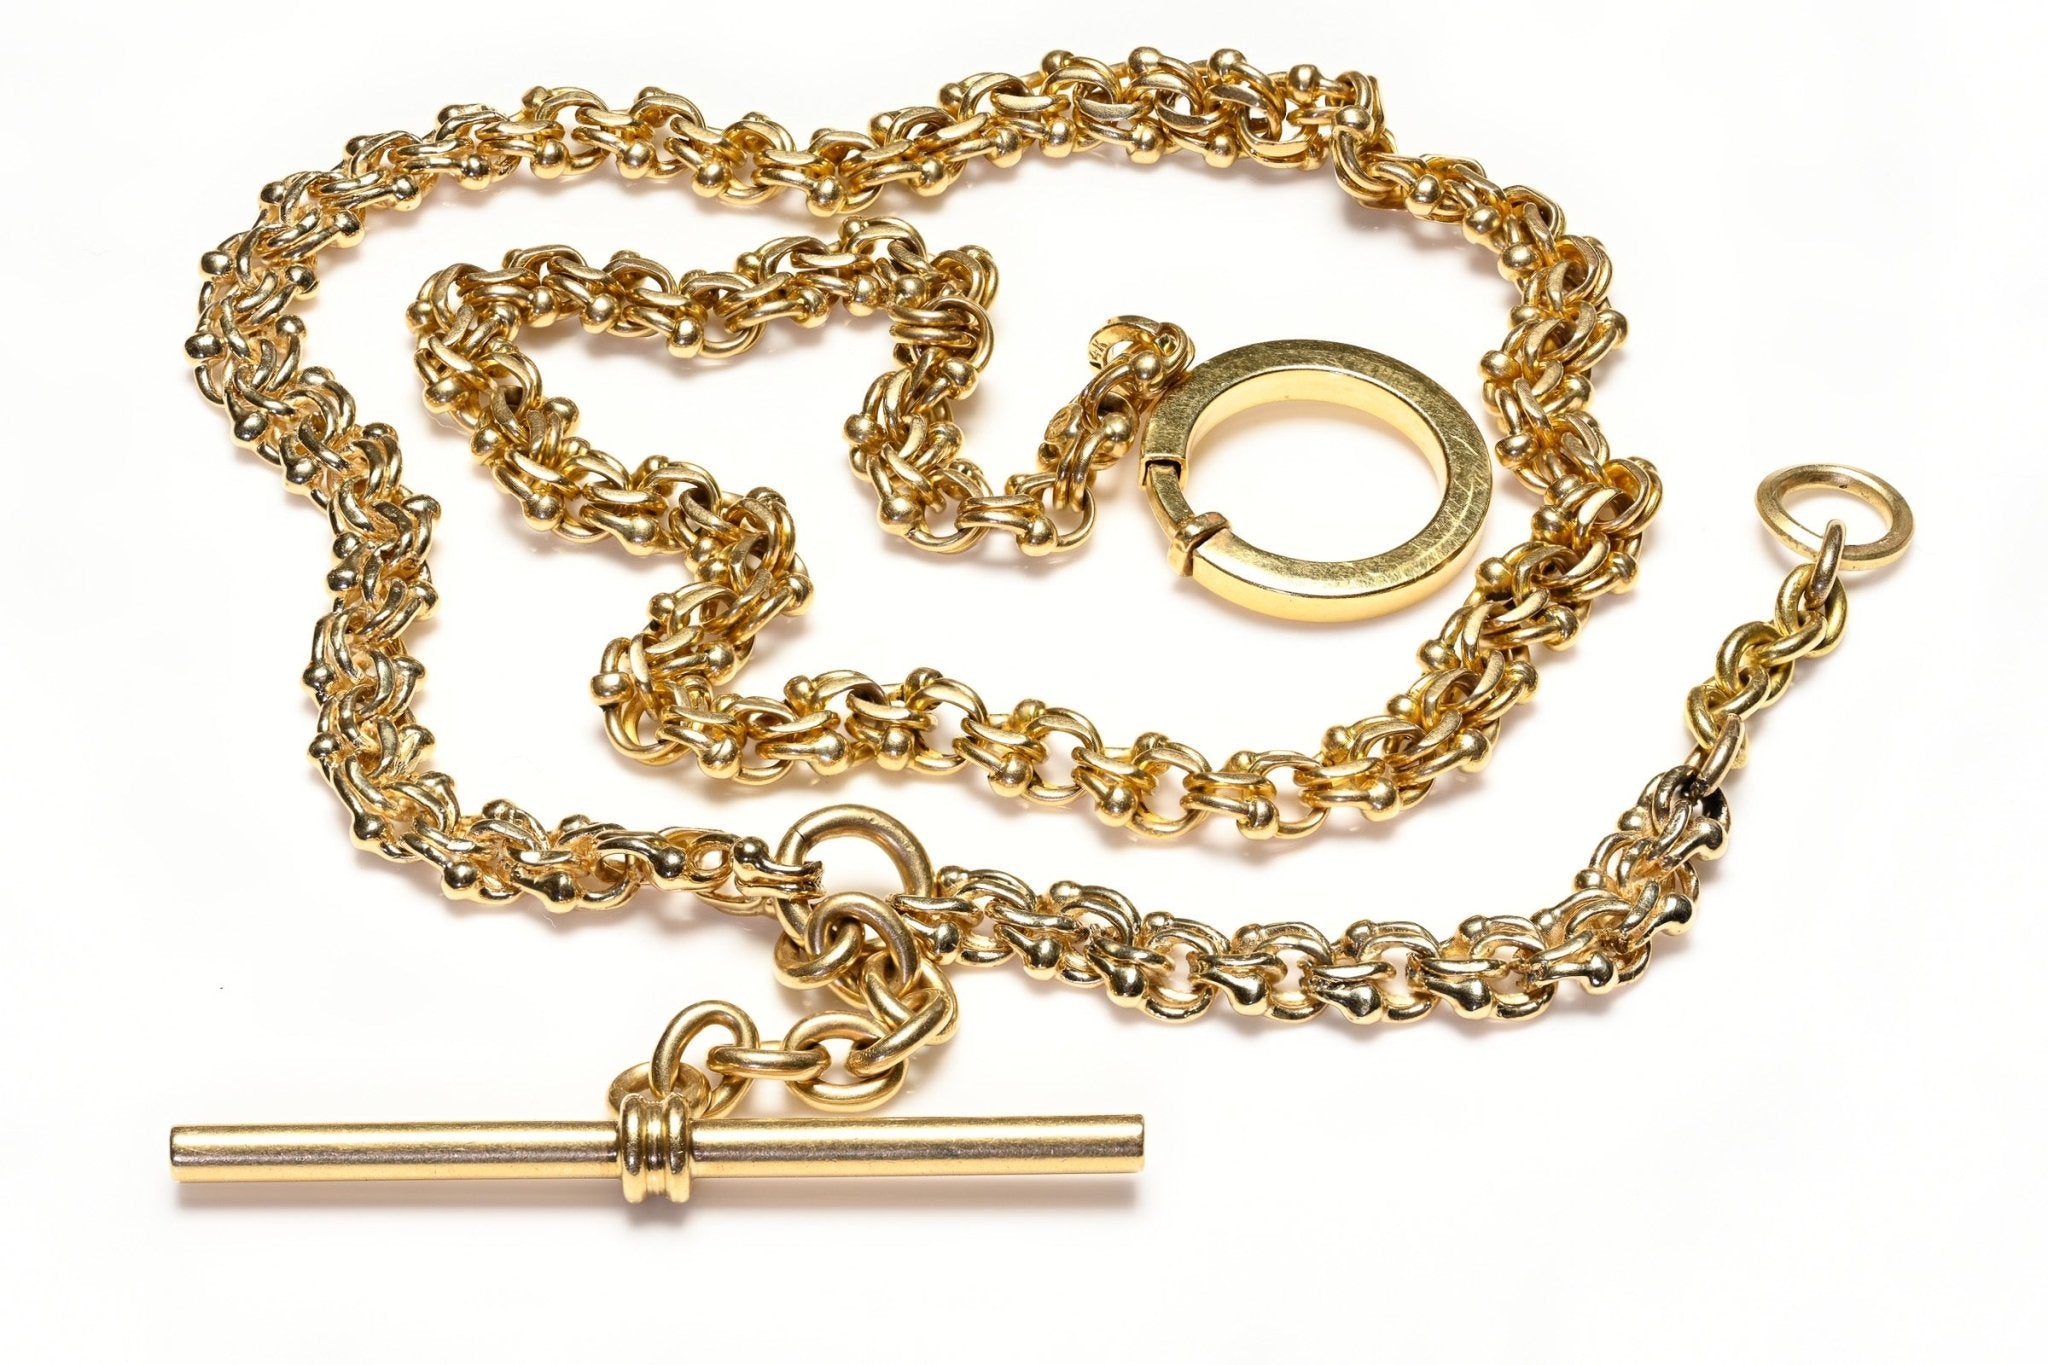 Antique Yellow Gold Pocket Watch Chain with Bar